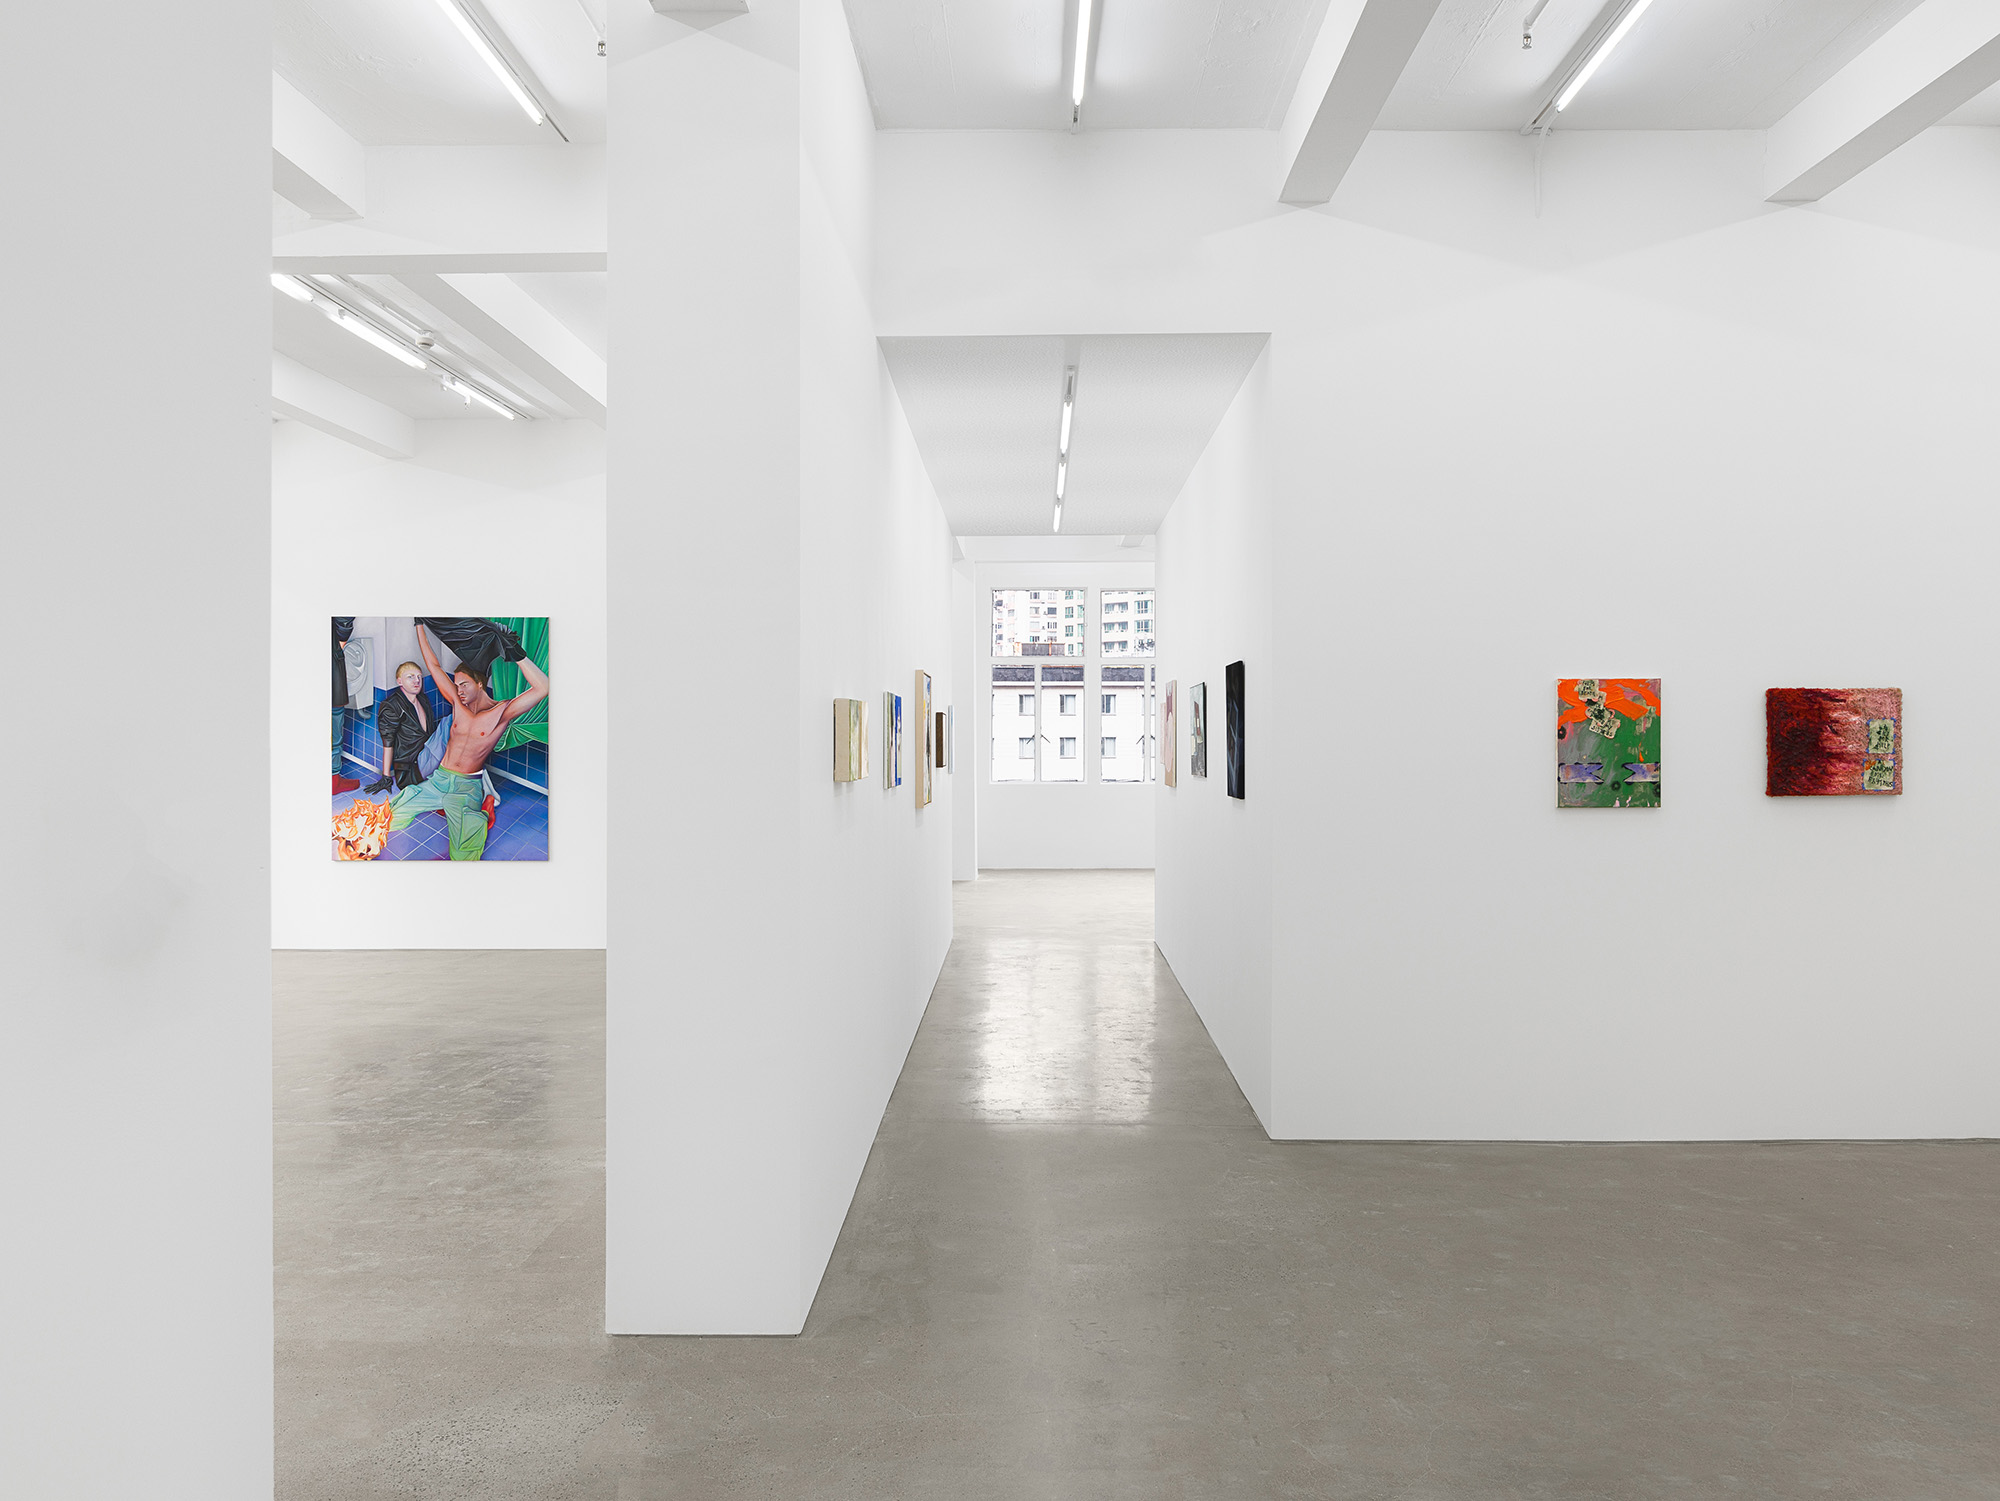 Installation view of group exhibition RAW at Gallery Vacancy, December 10, 2022–January 14, 2023.